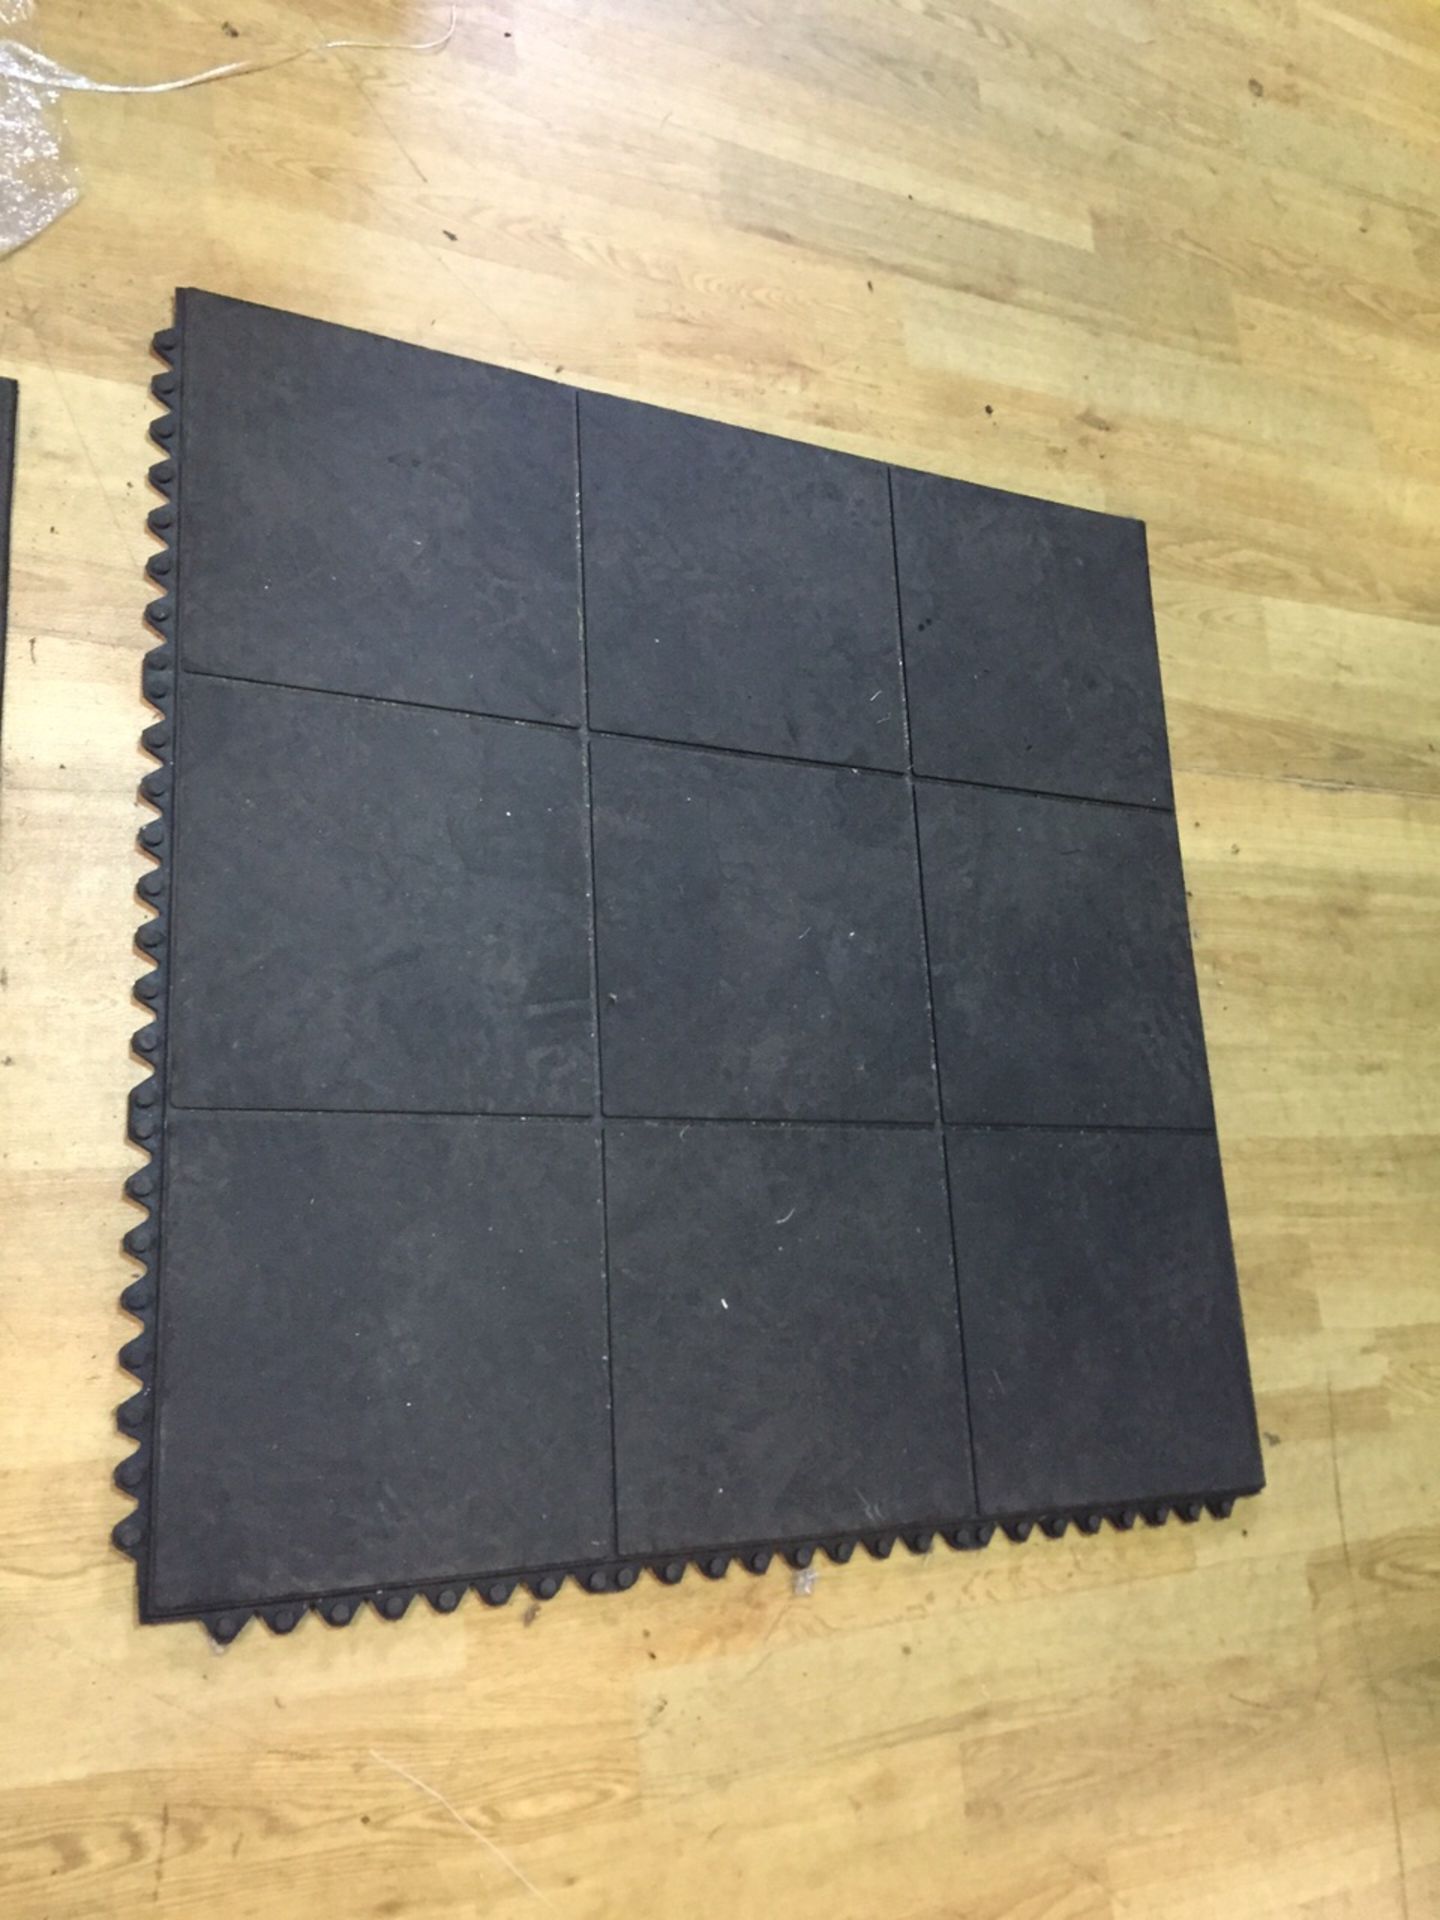 Rubber Gym Mats (9 mats per lot)

Interlocking heavy duty rubber mats specifically designed for